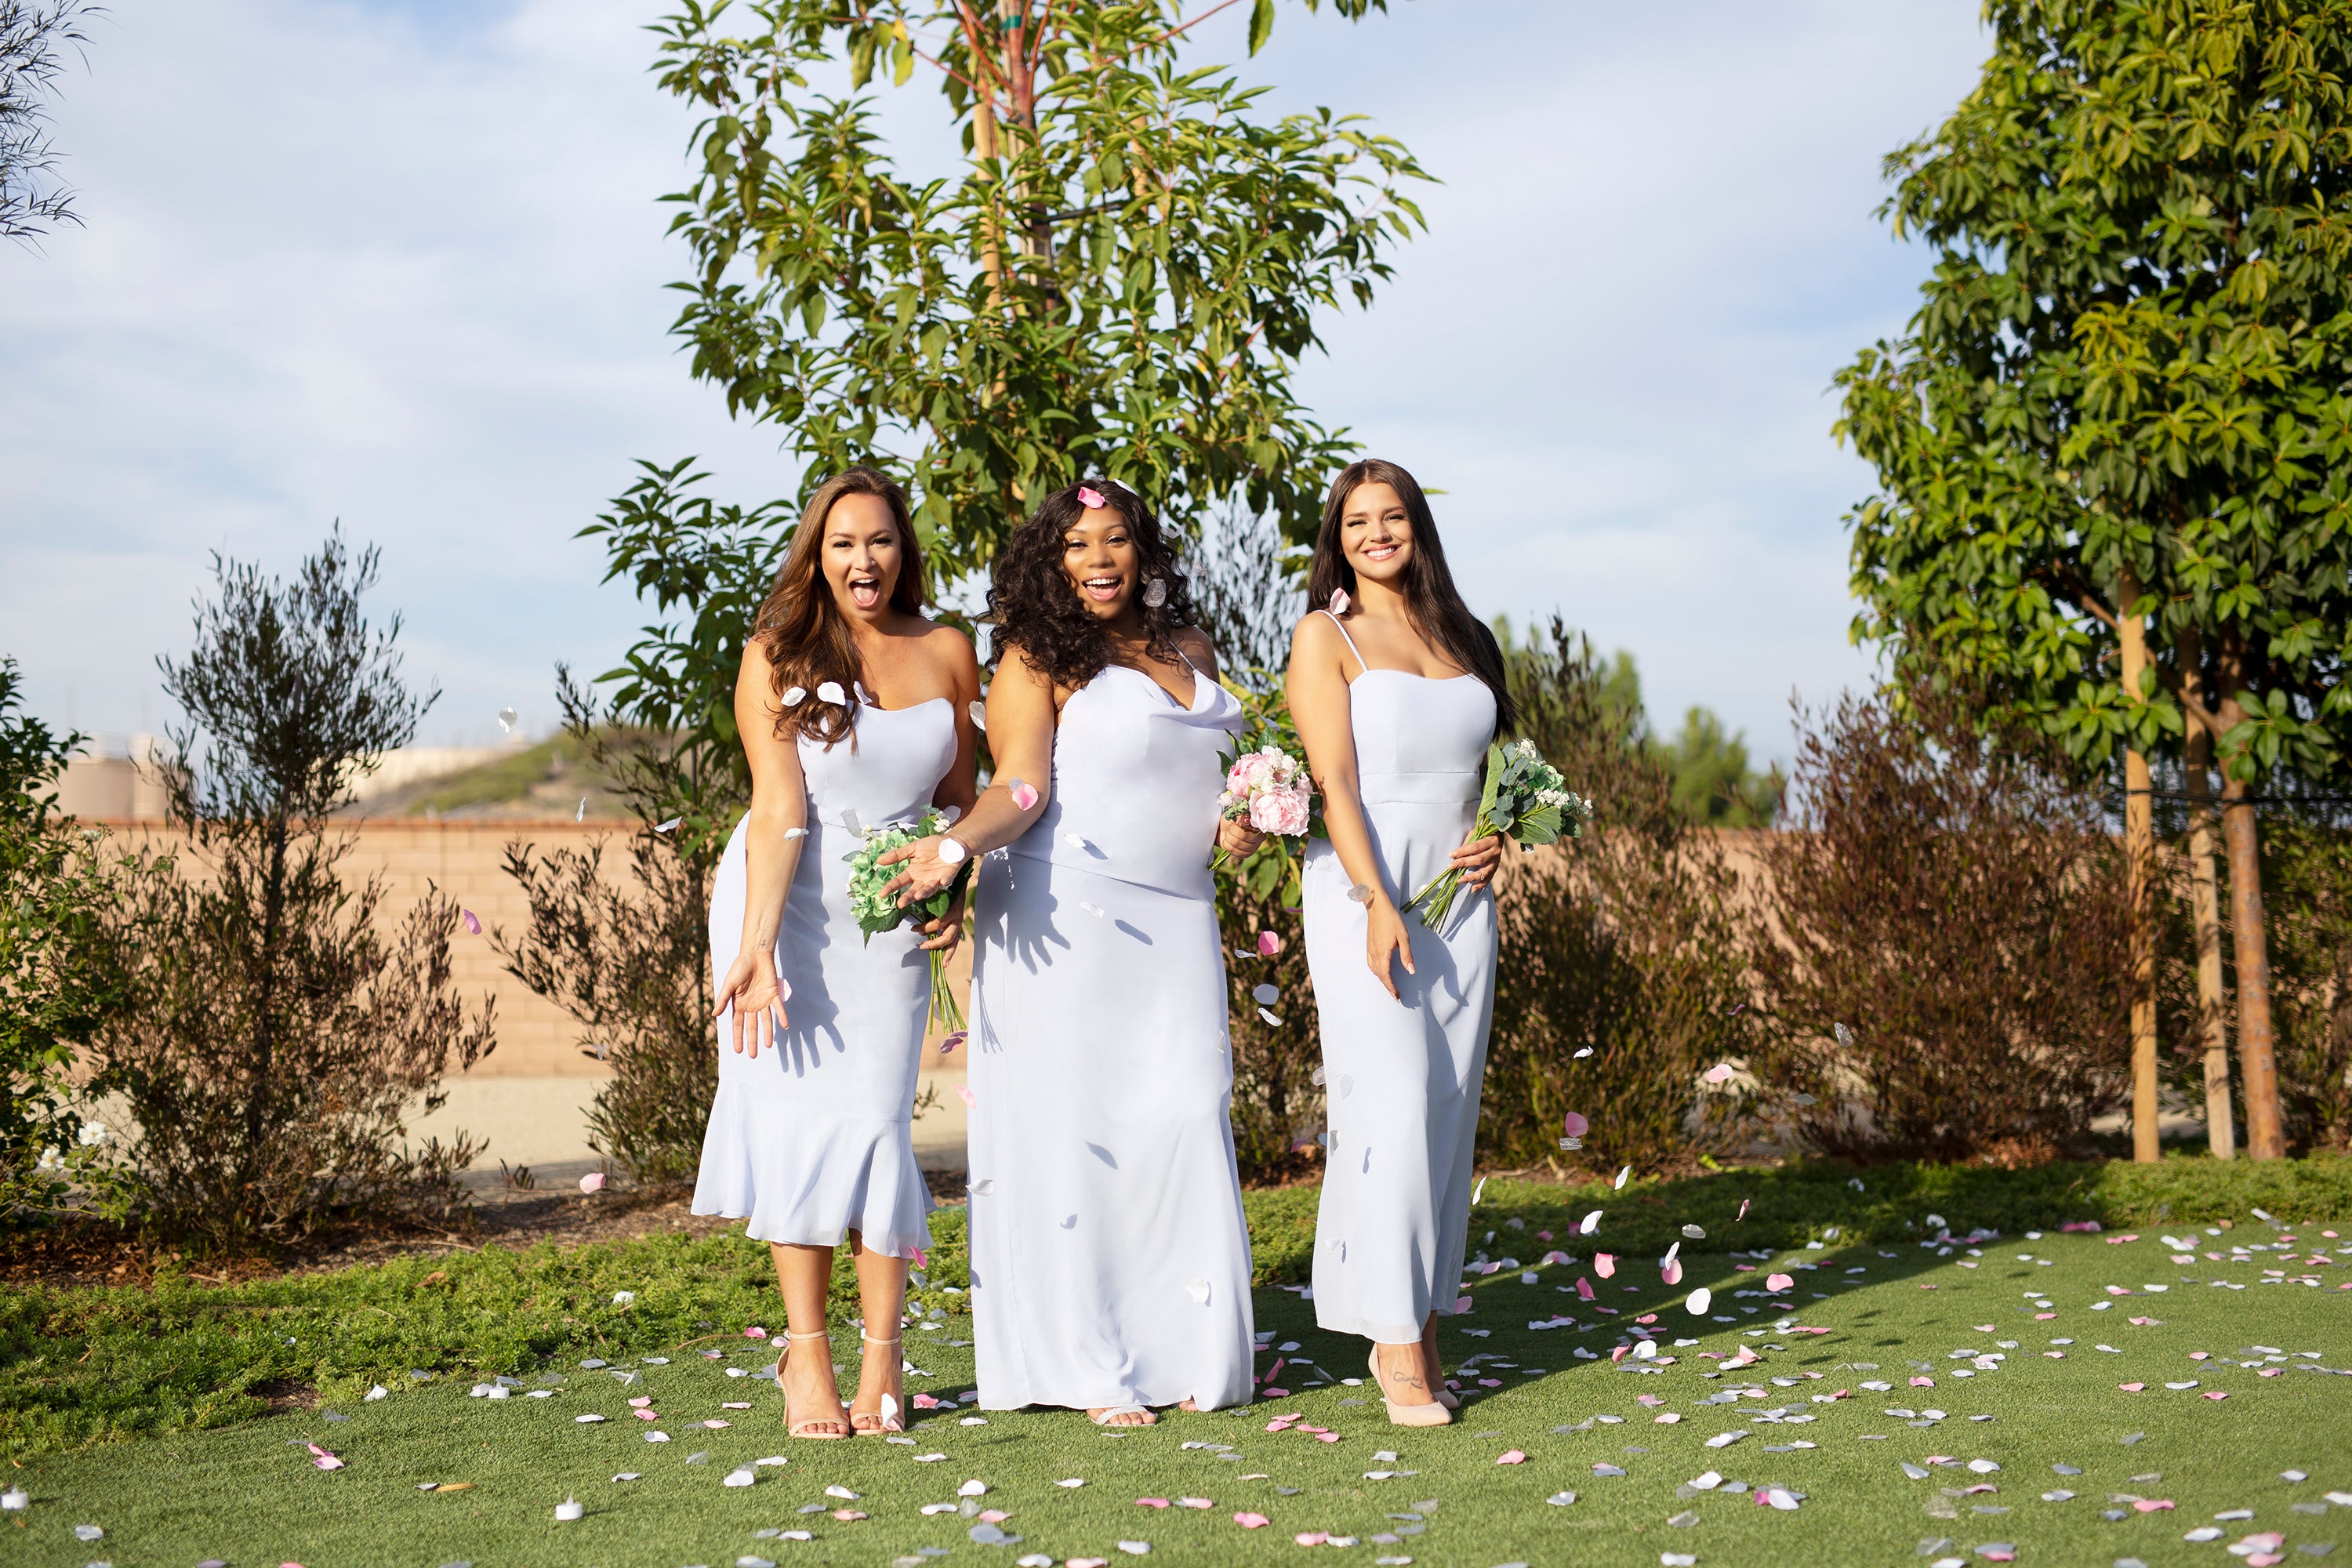 What Actually Are Bridesmaid Duties?